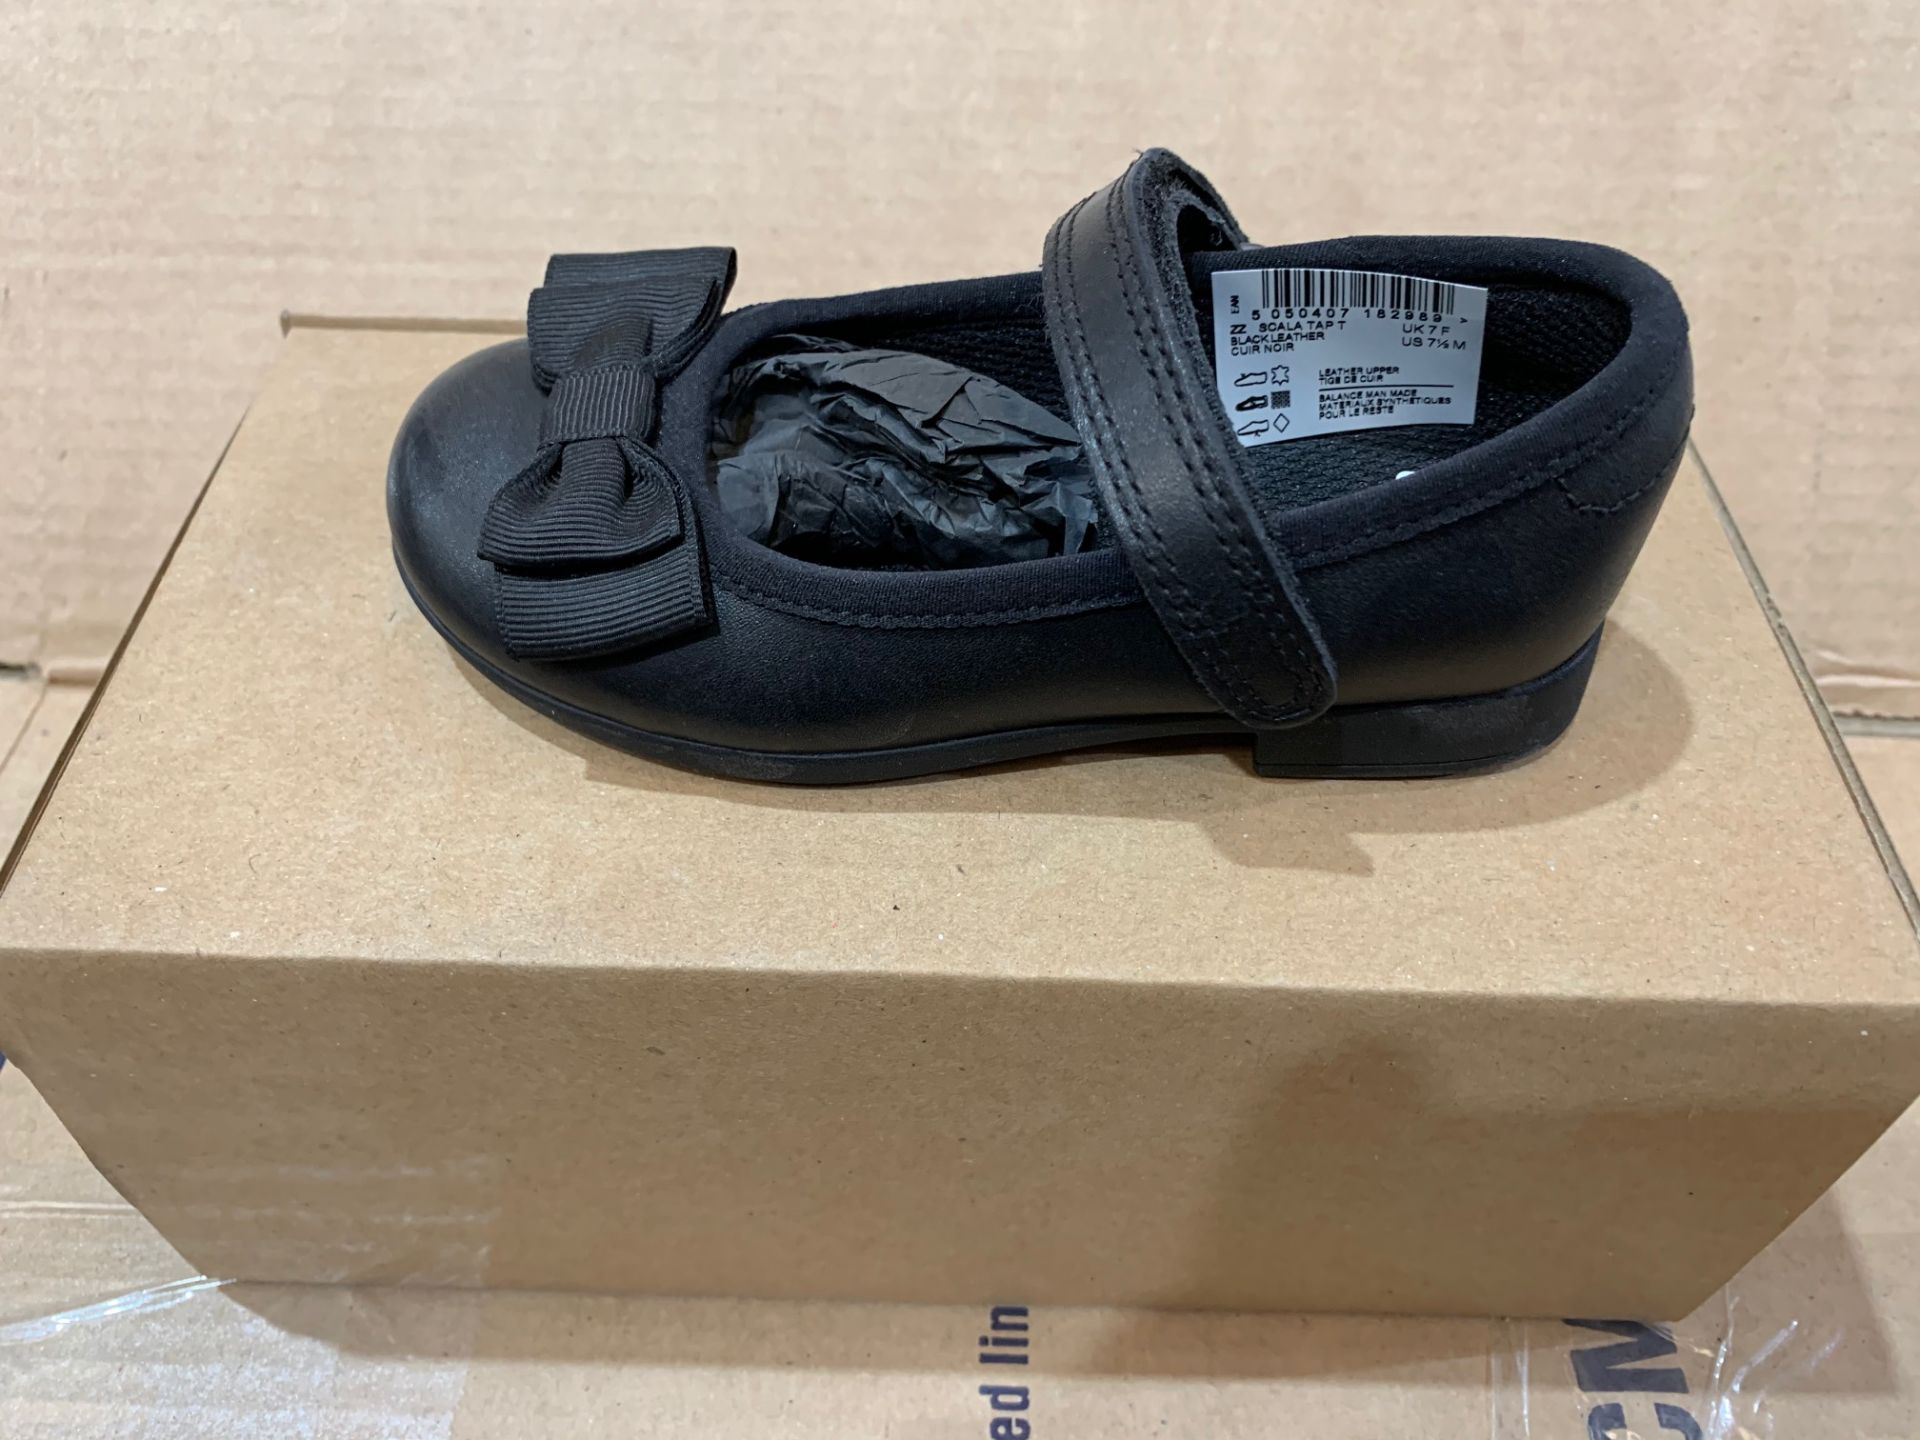 1 X NEW & BOXED CLARKS SHOES PG417105 SIZE INFANT 7